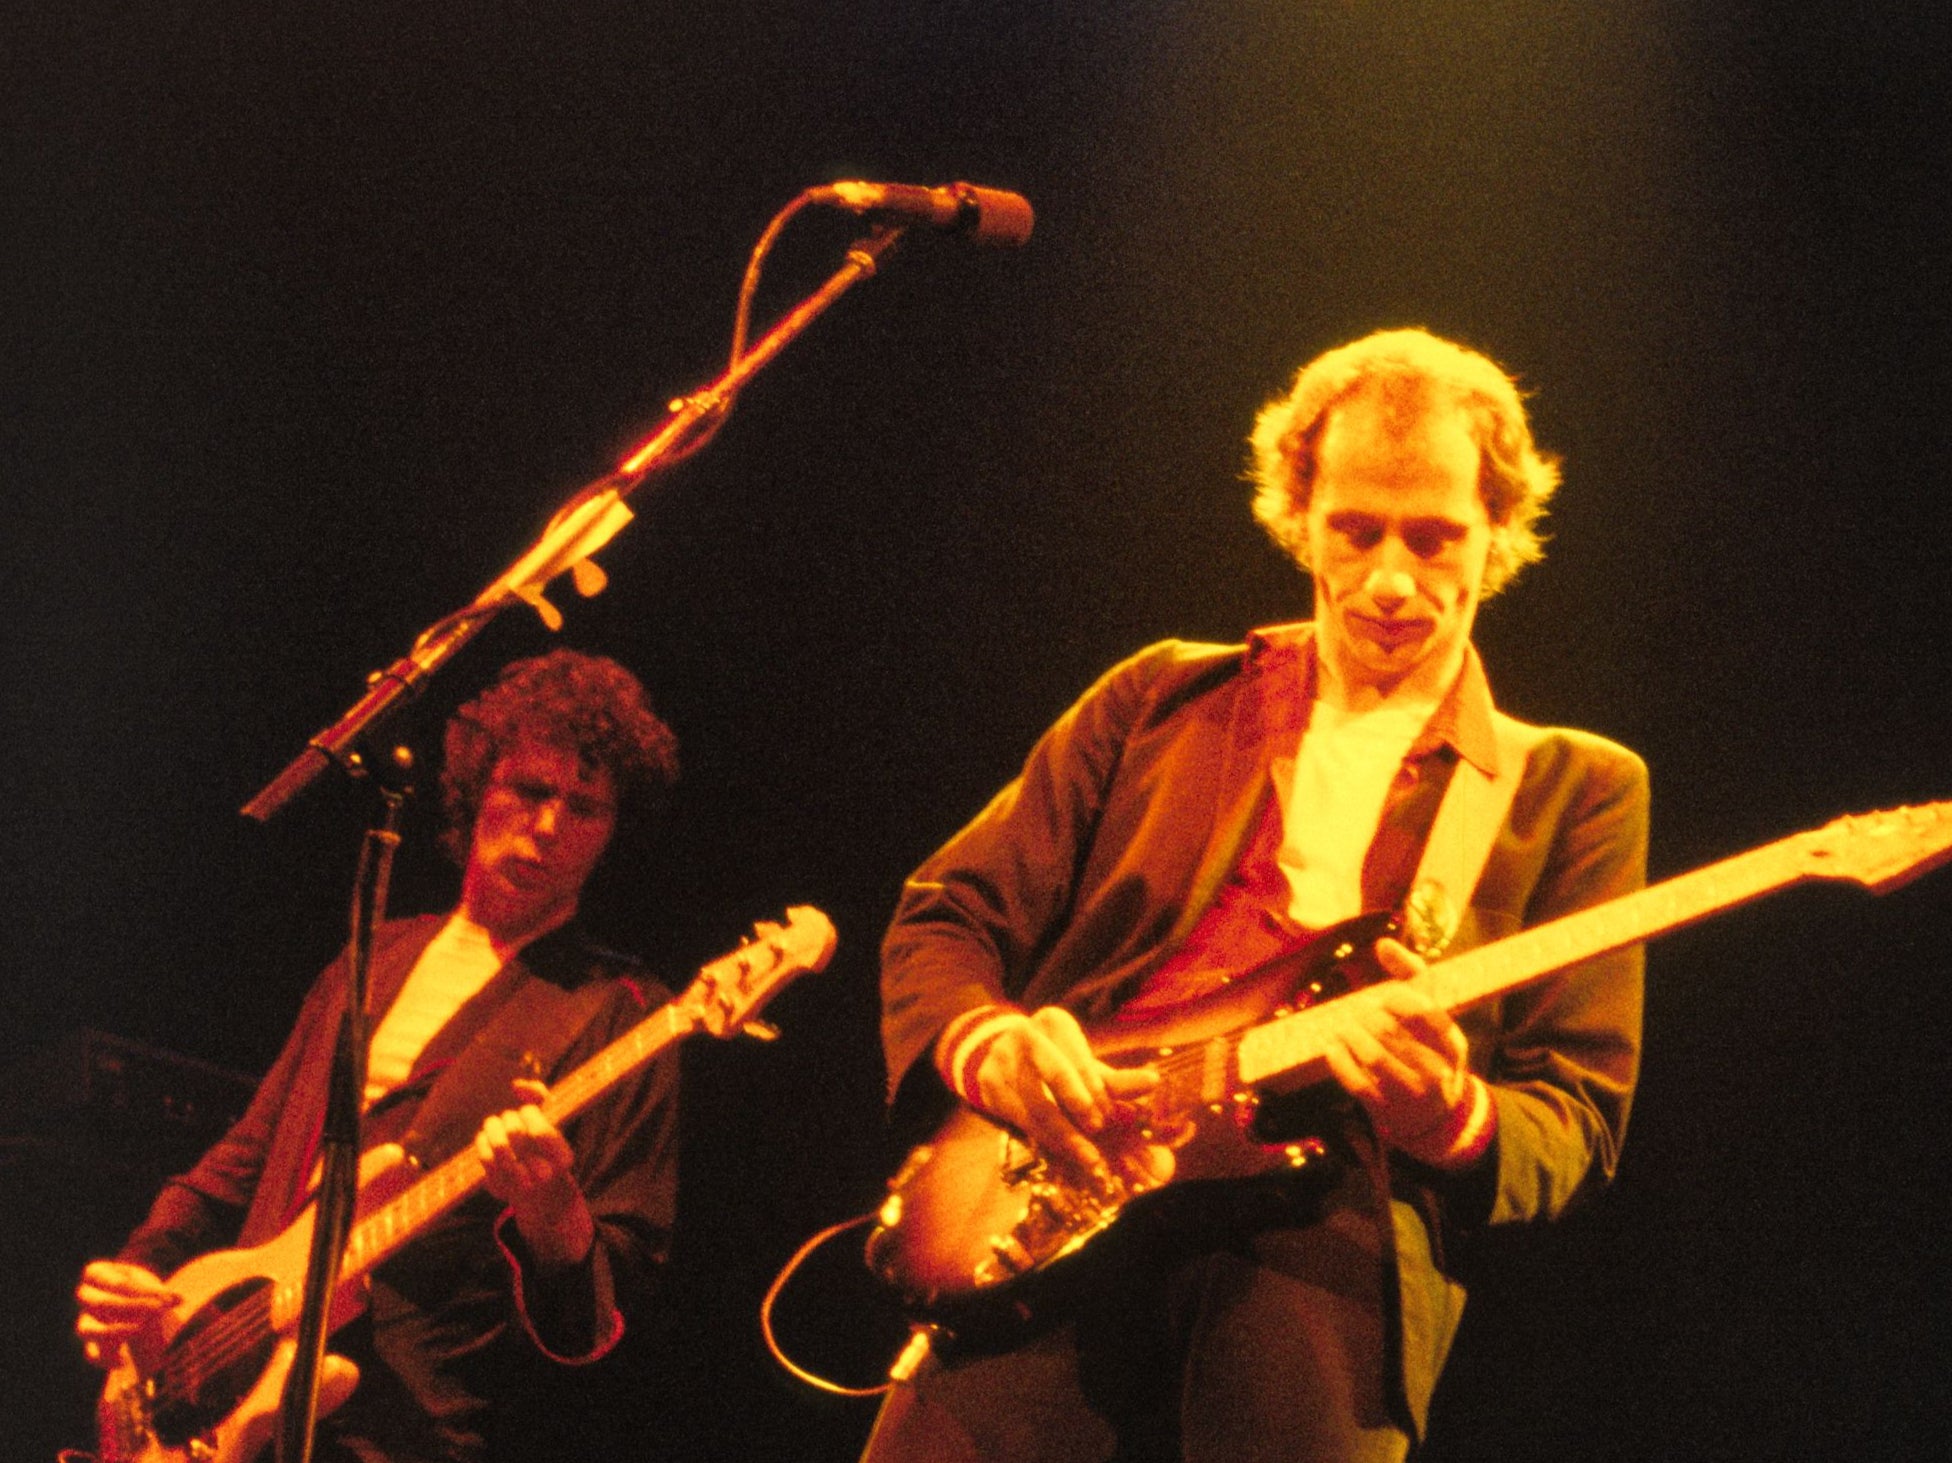 John Illsley and Mark Knopfler playing a Dire Straits gig in 1979